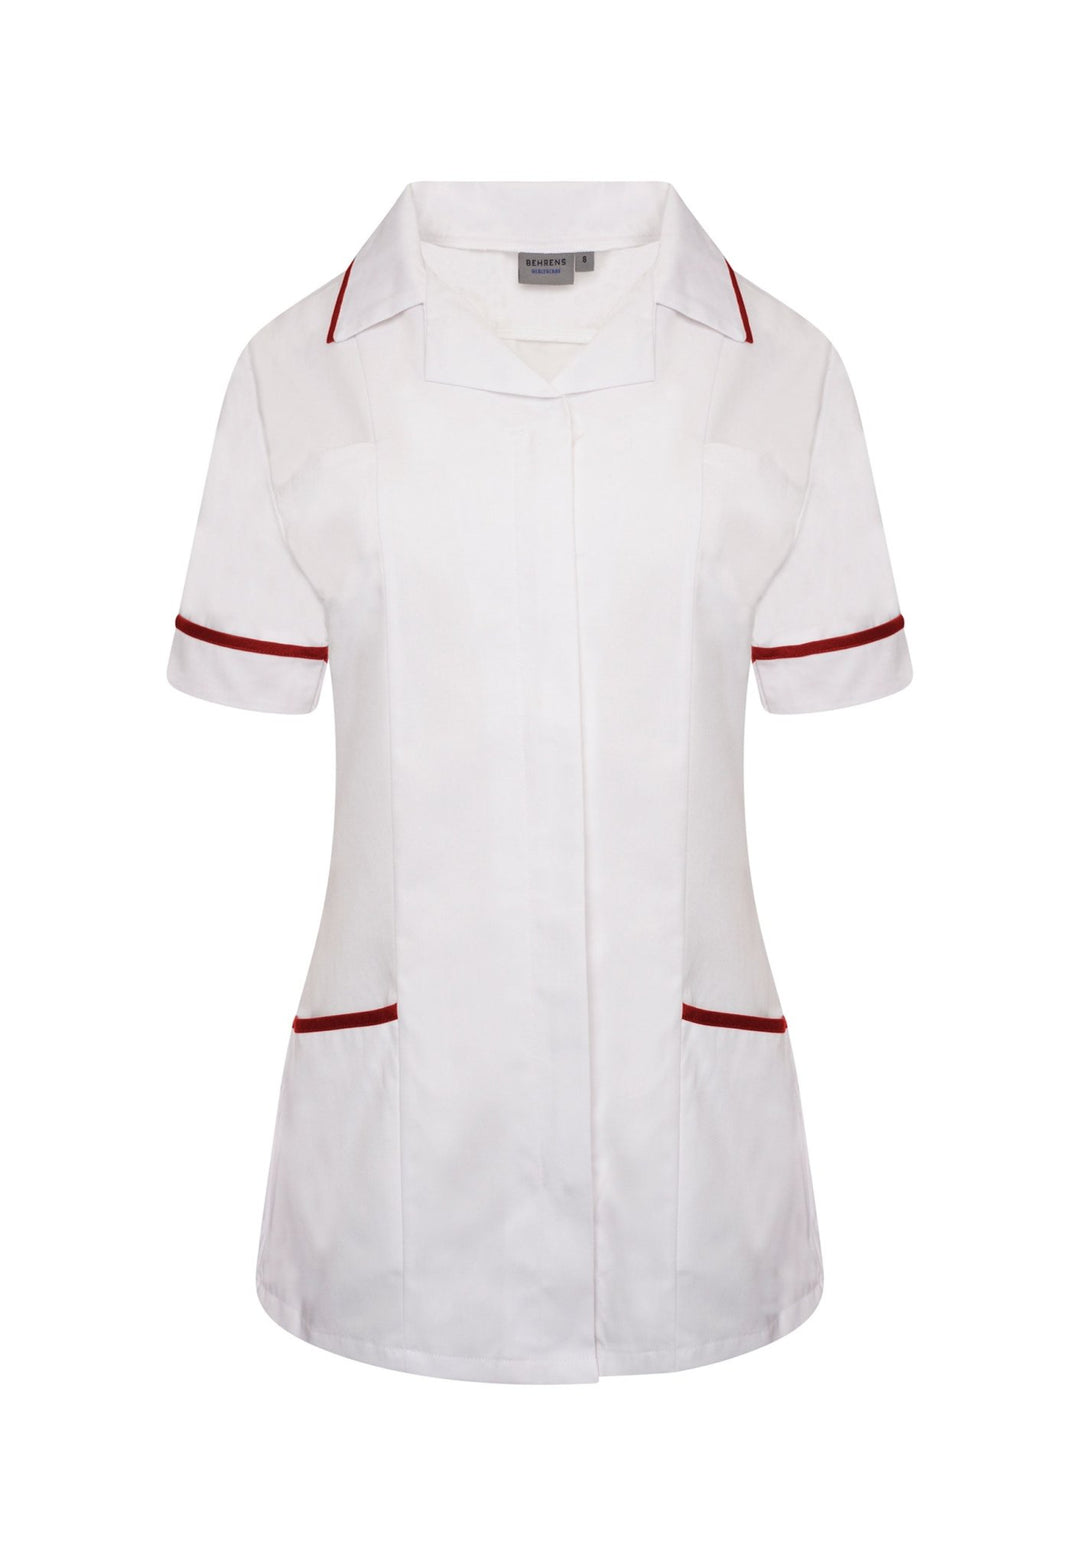 Women's Healthcare Tunic with Revere Collar NCLTPSR - The Work Uniform Company